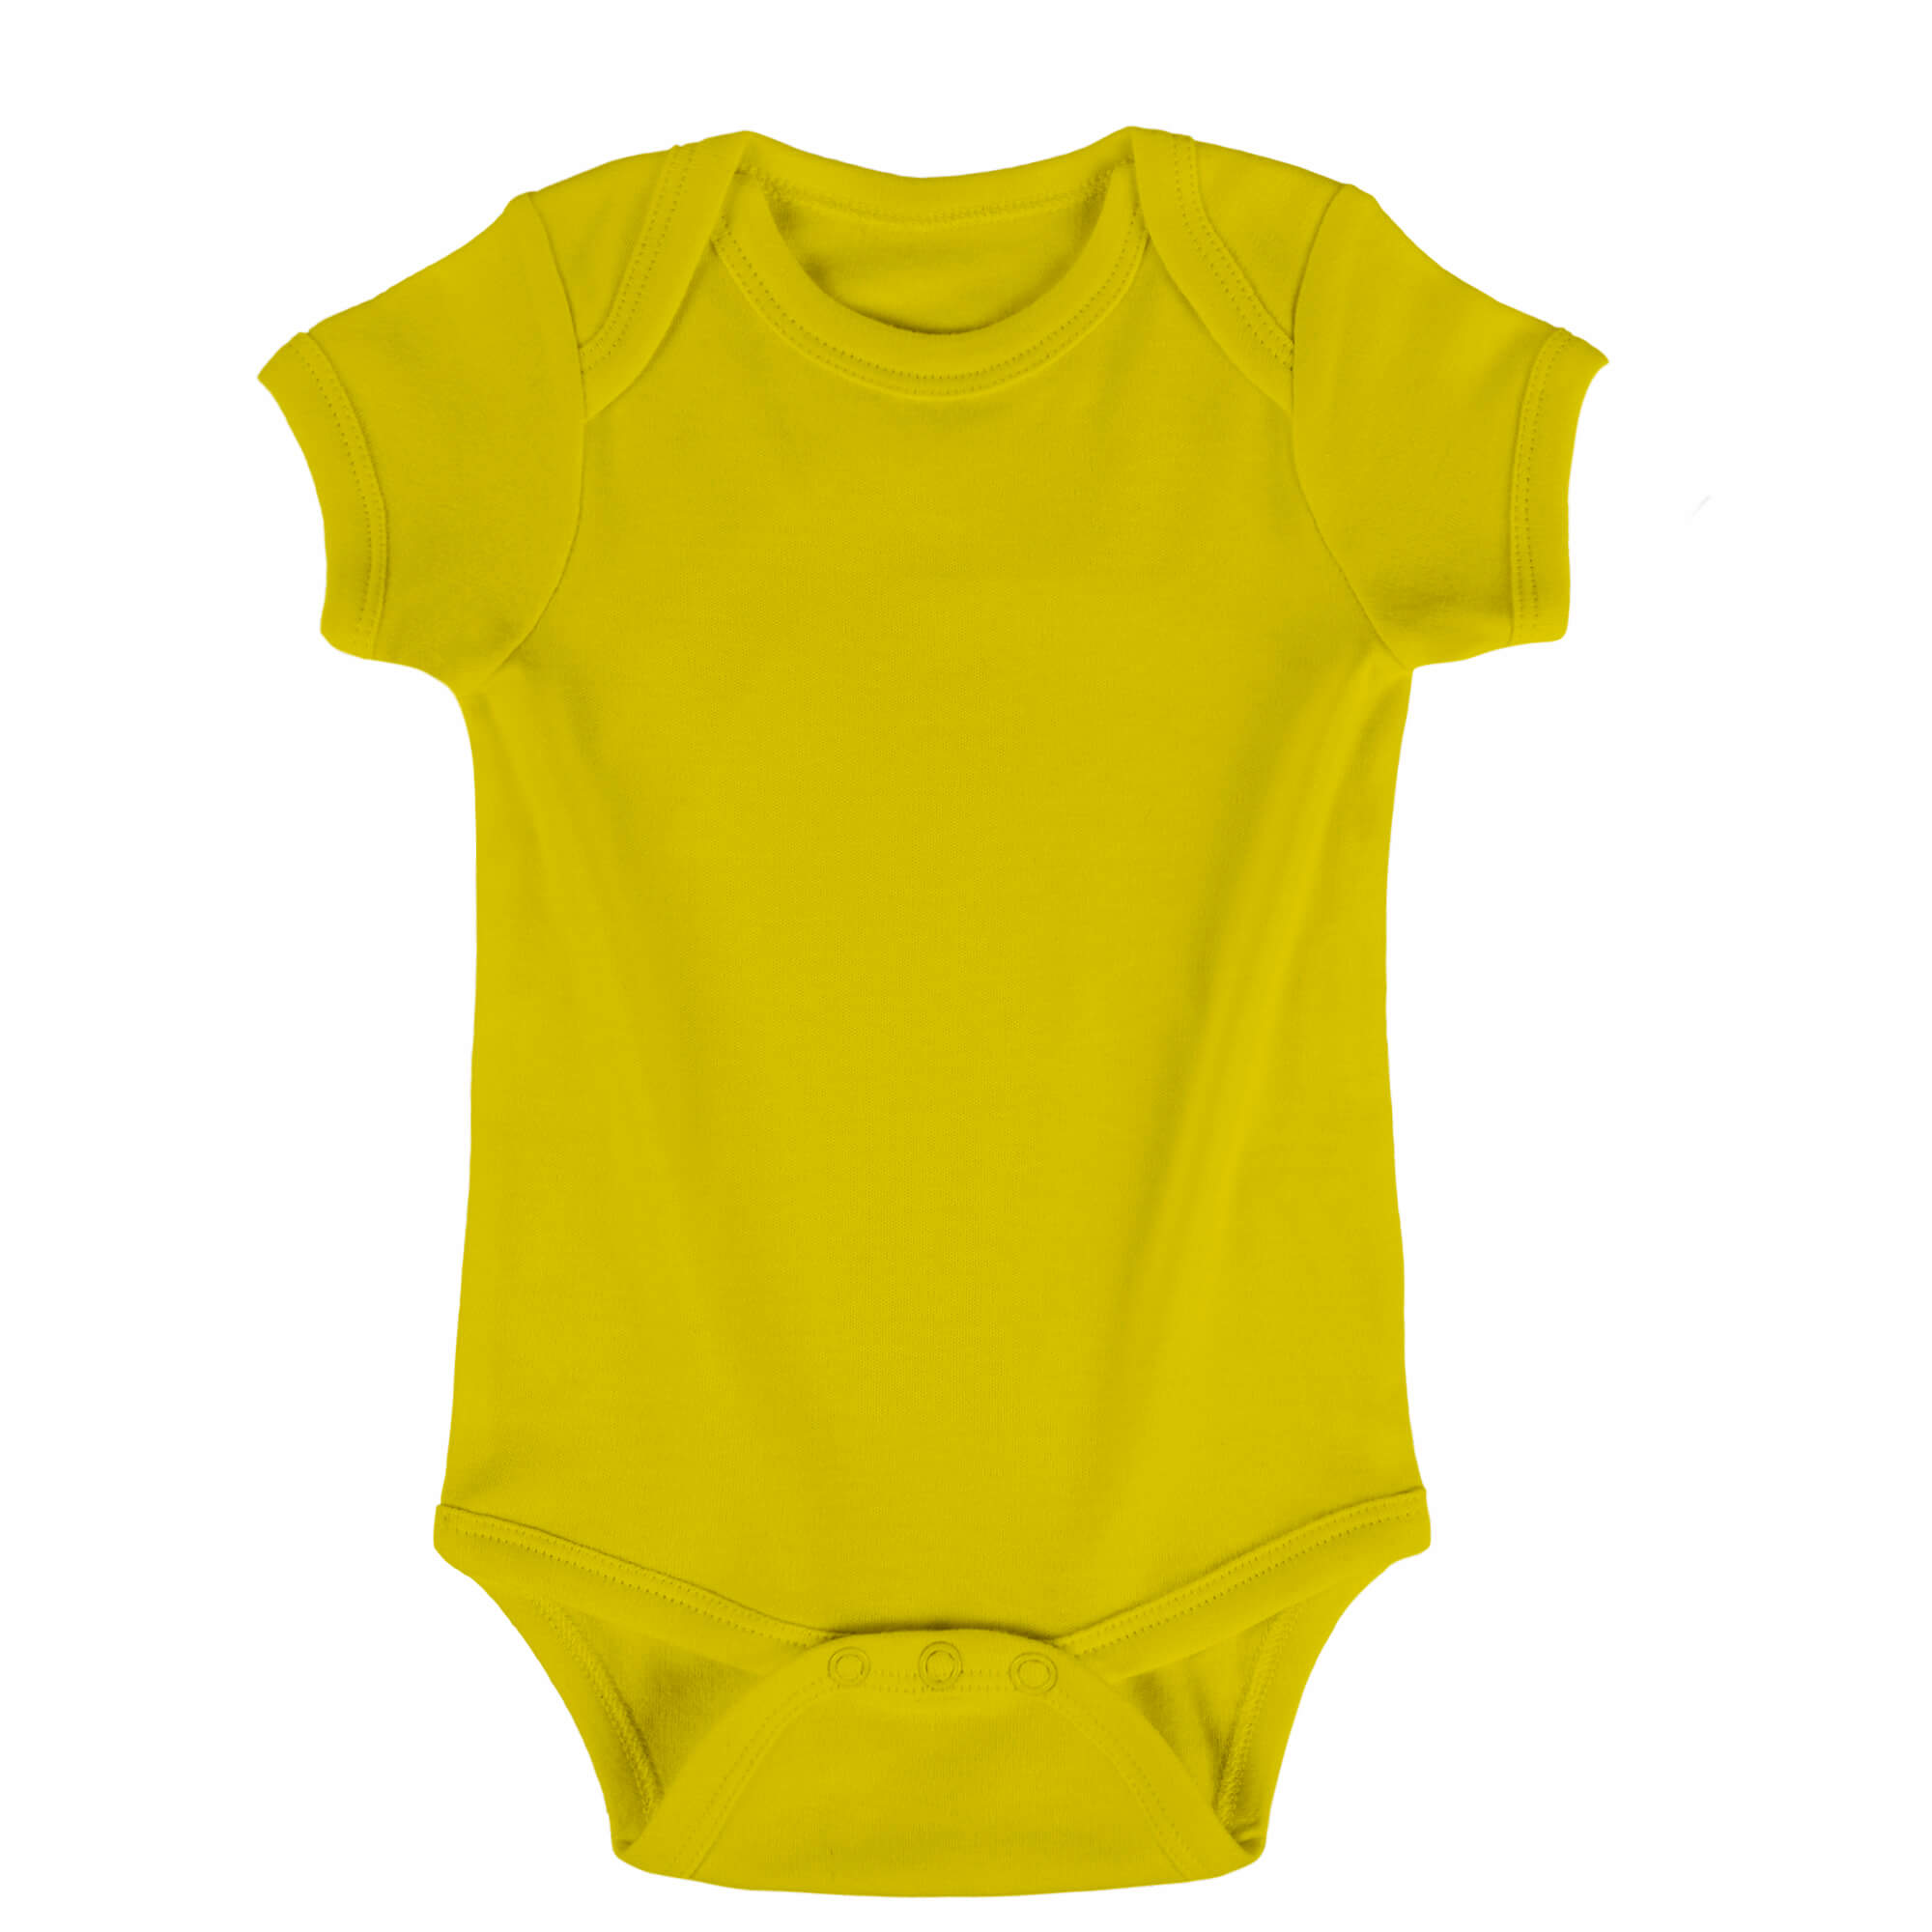 green yellow color number #9, onesie color selection, and color display.